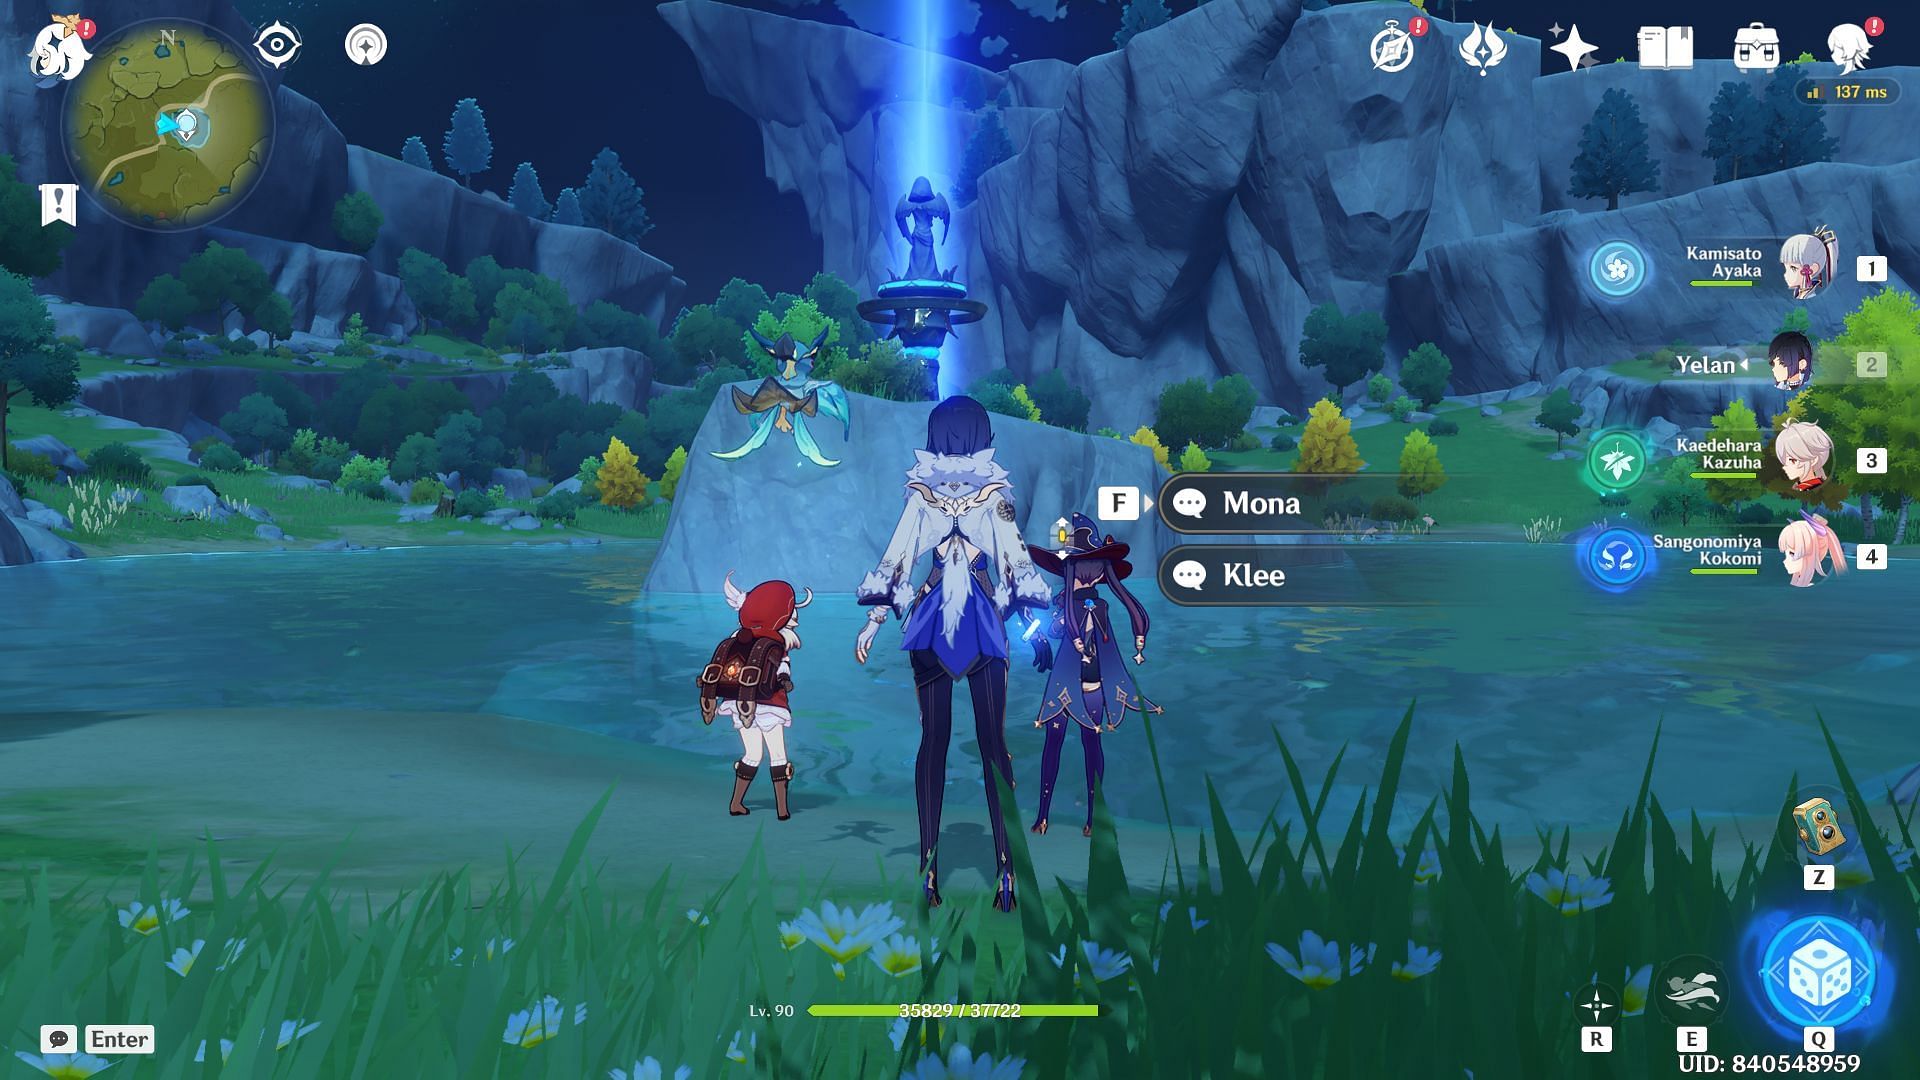 Mona and Klee are near the Statue of the Seven (Image via HoYoverse)